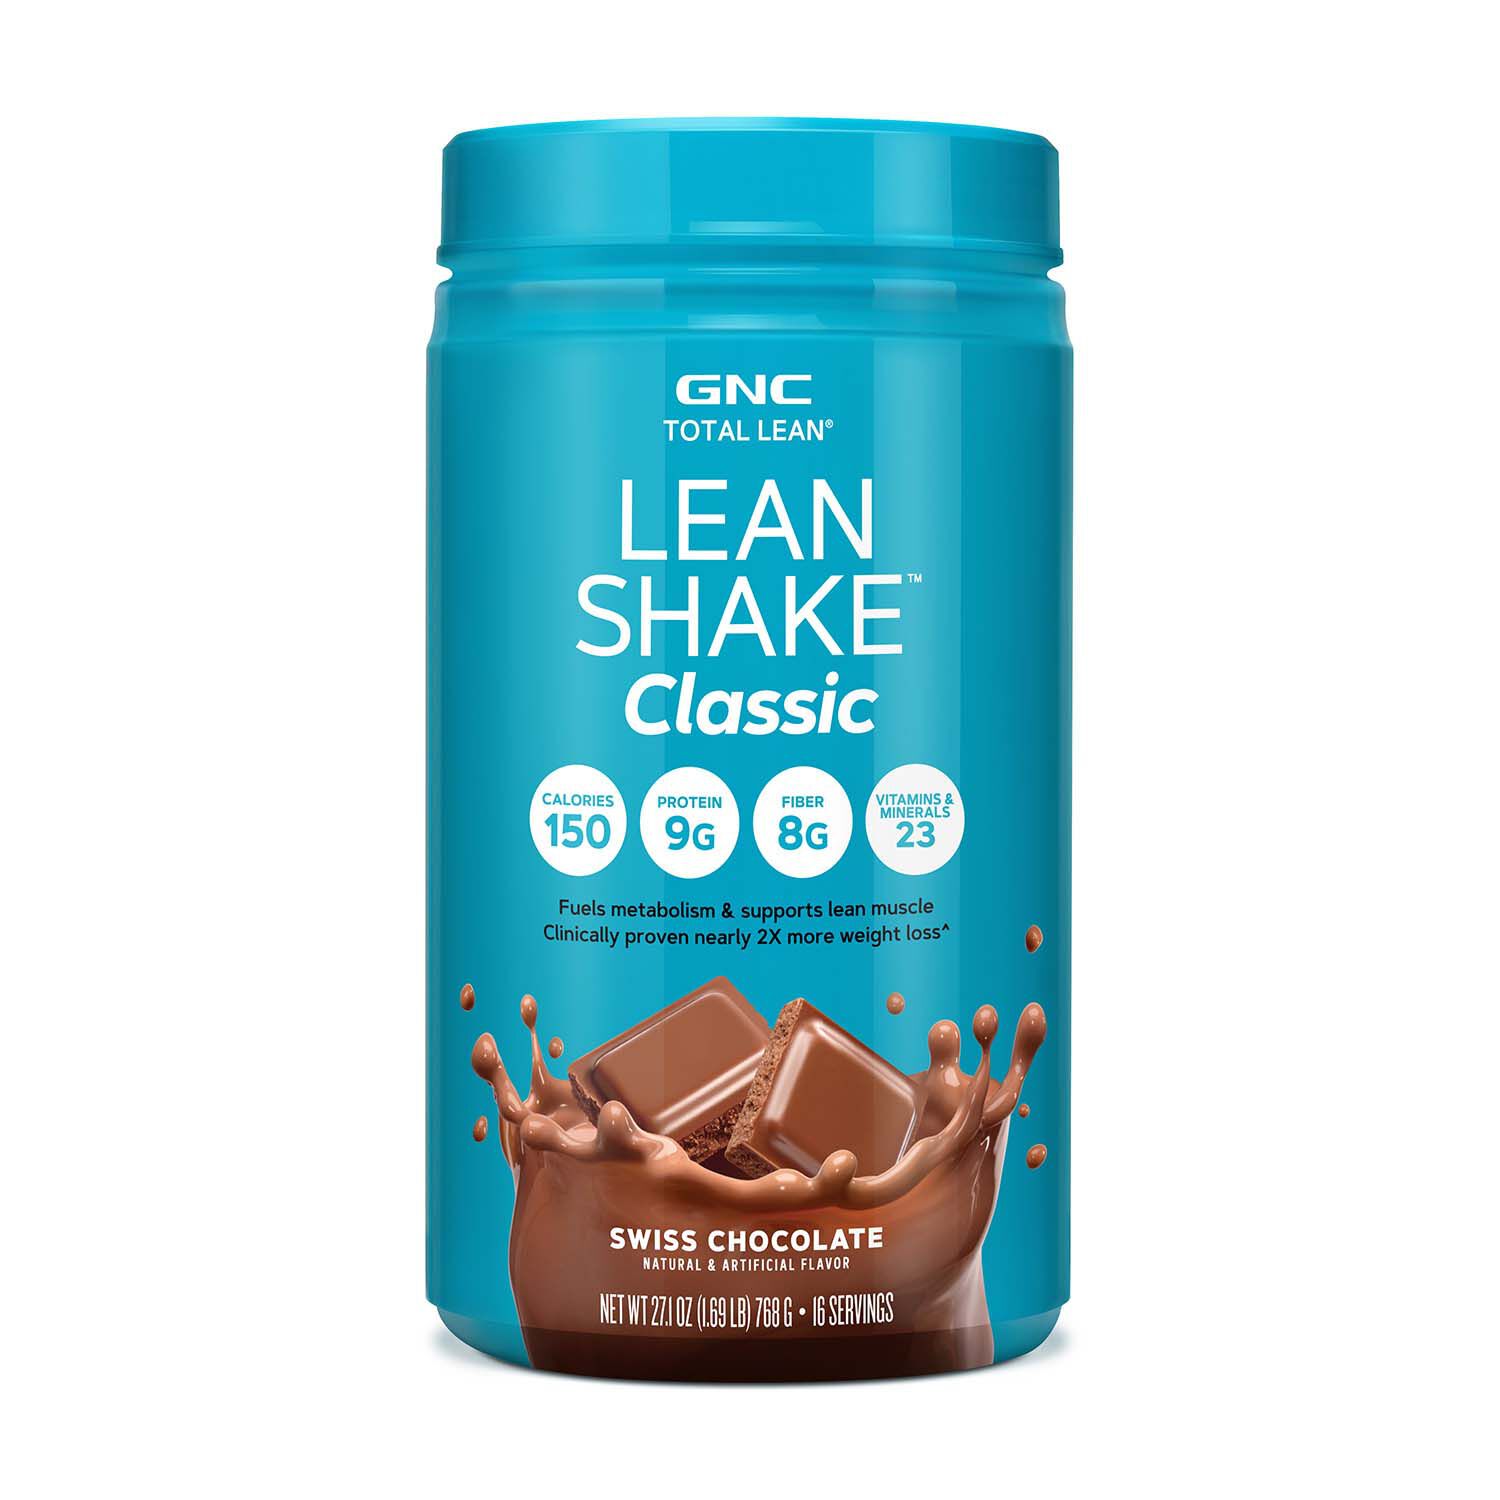 GNC Total Lean Lean Shake Meal Replacement Classic Swiss Chocolate